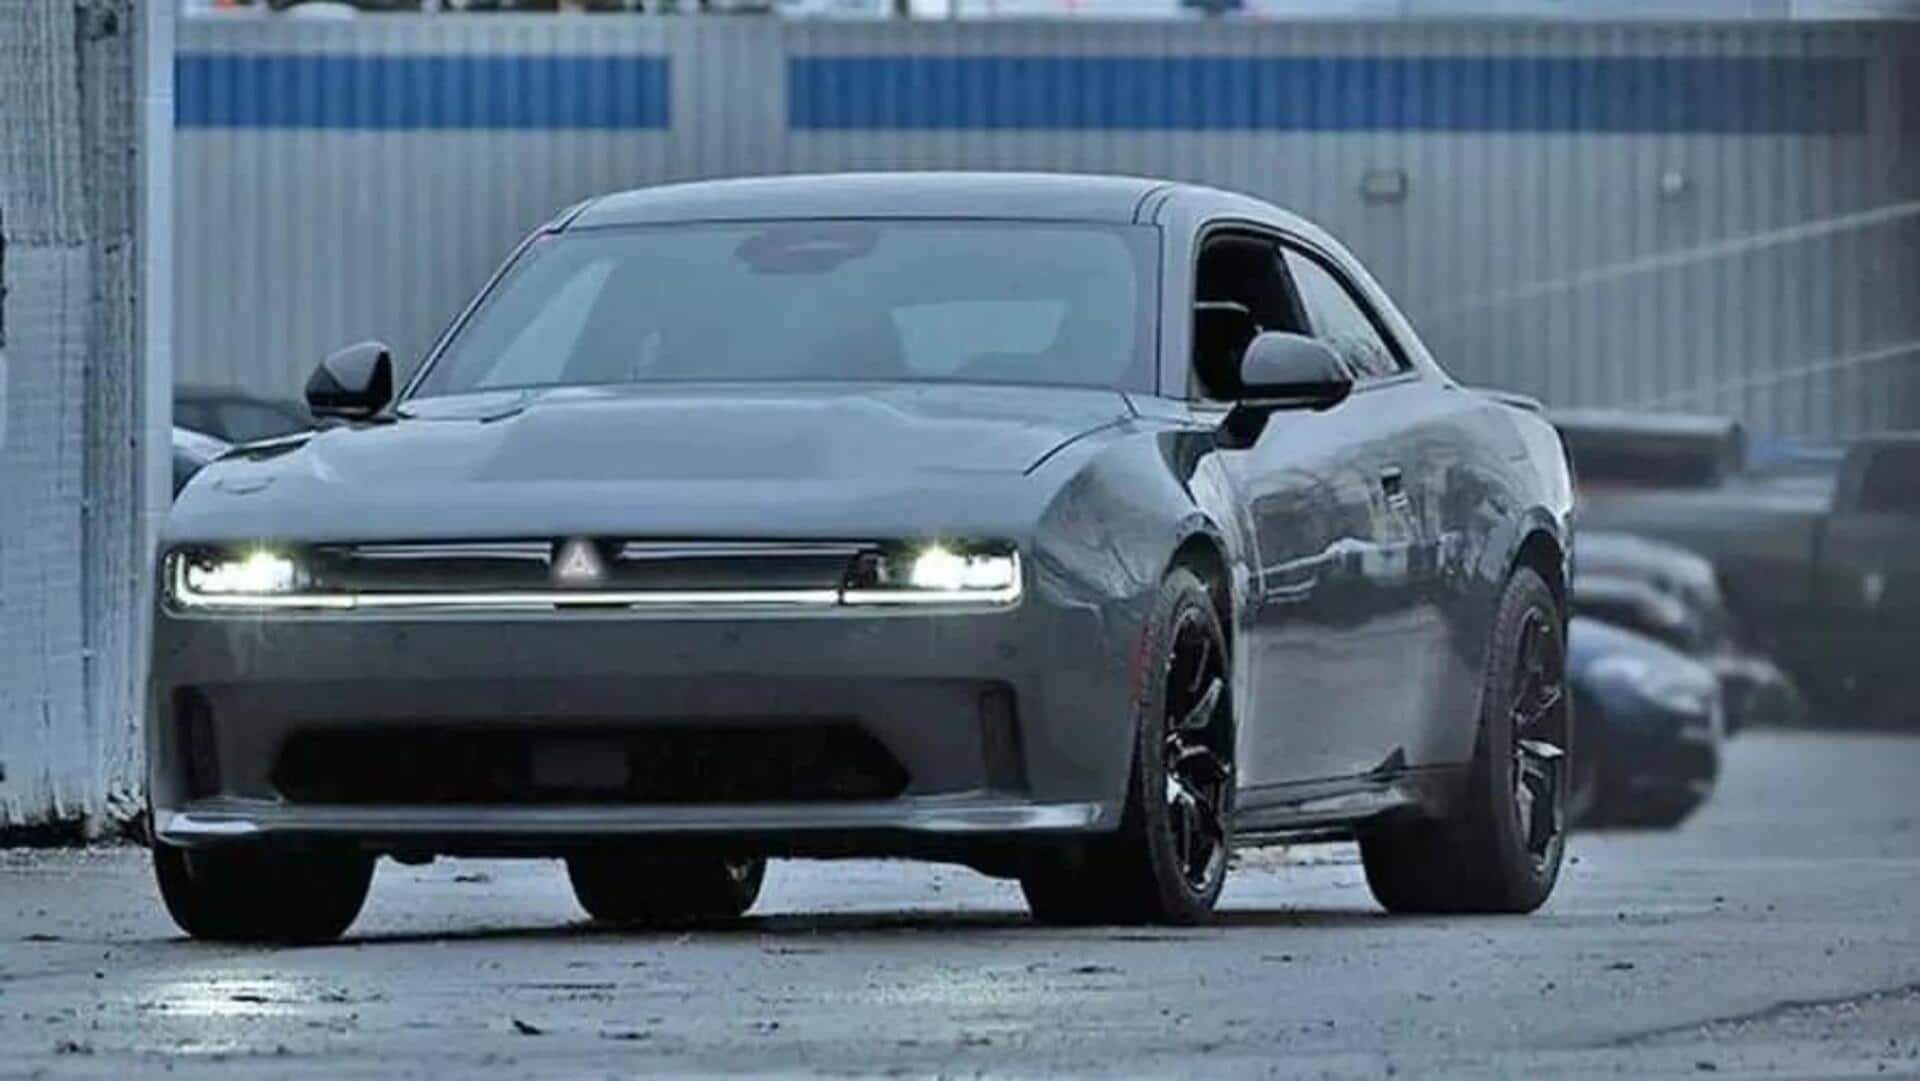 Dodge teases new-generation Charger Daytona EV: What we can expect